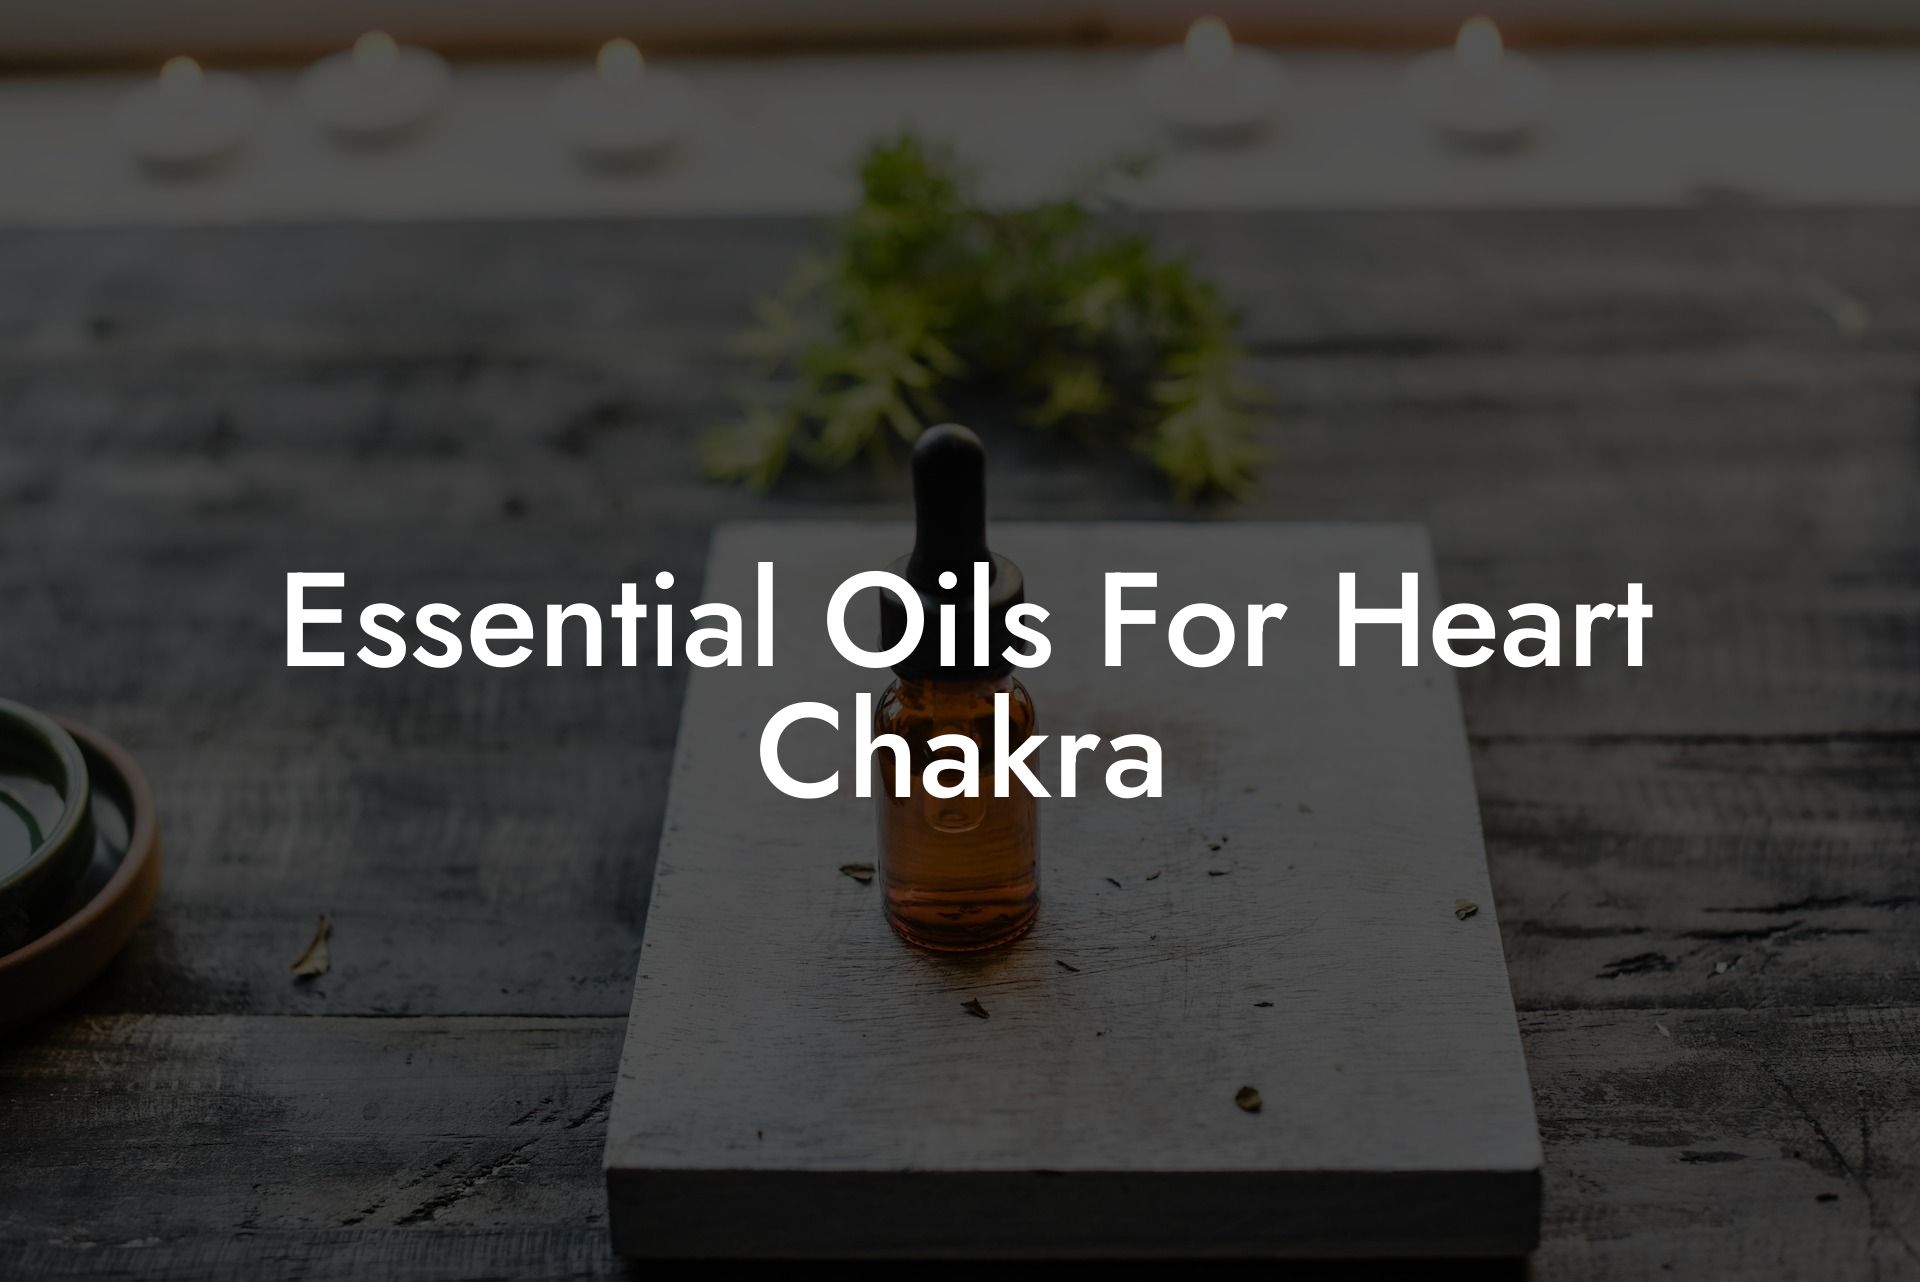 Essential Oils For Heart Chakra